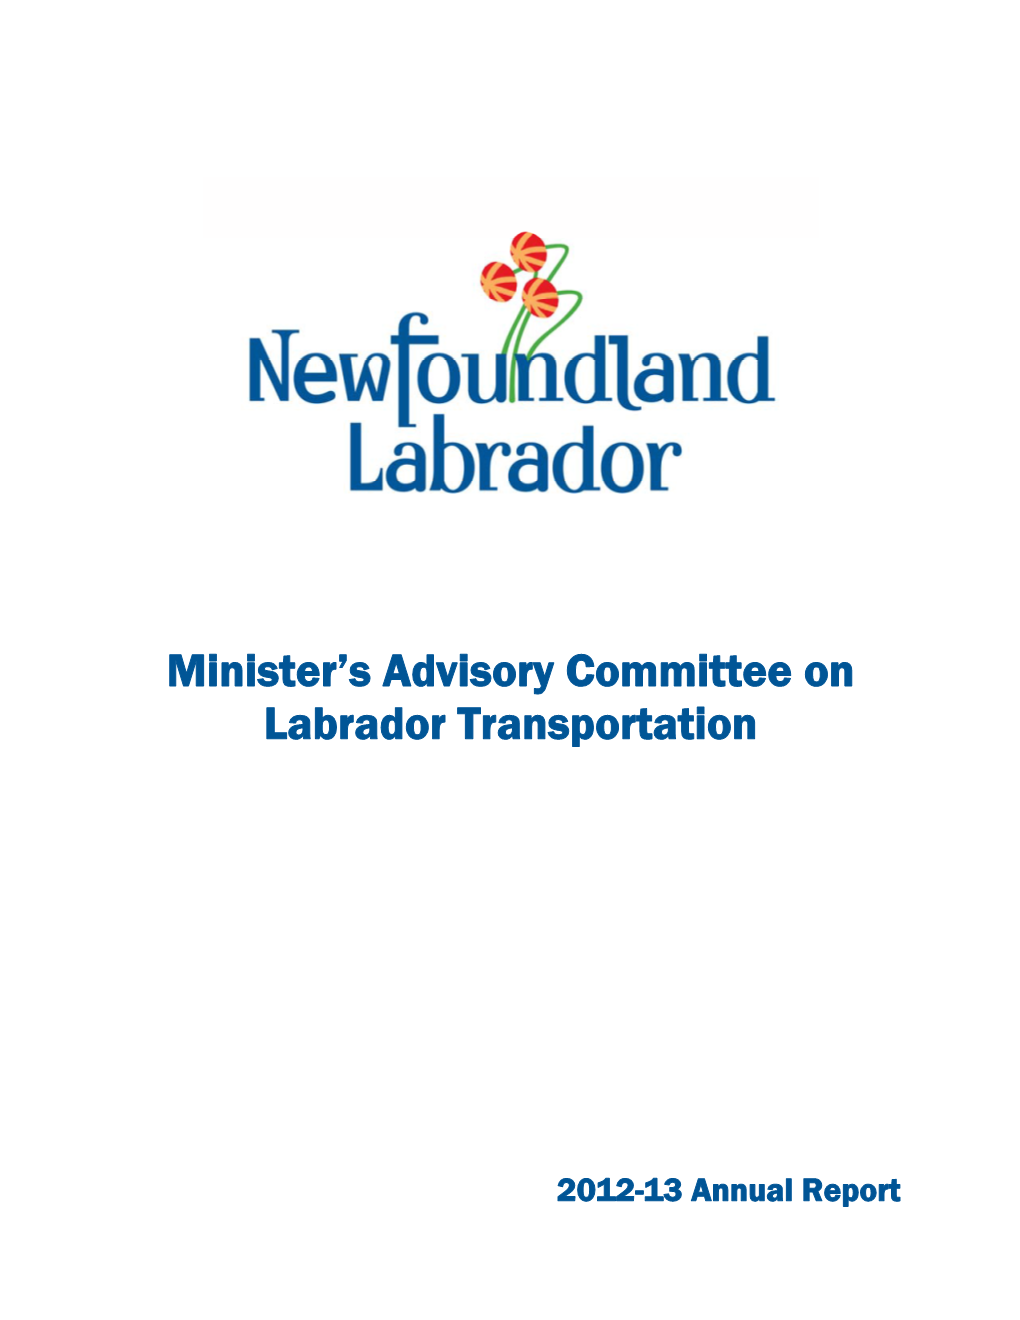 Minister's Advisory Committee on Labrador Transportation Annual